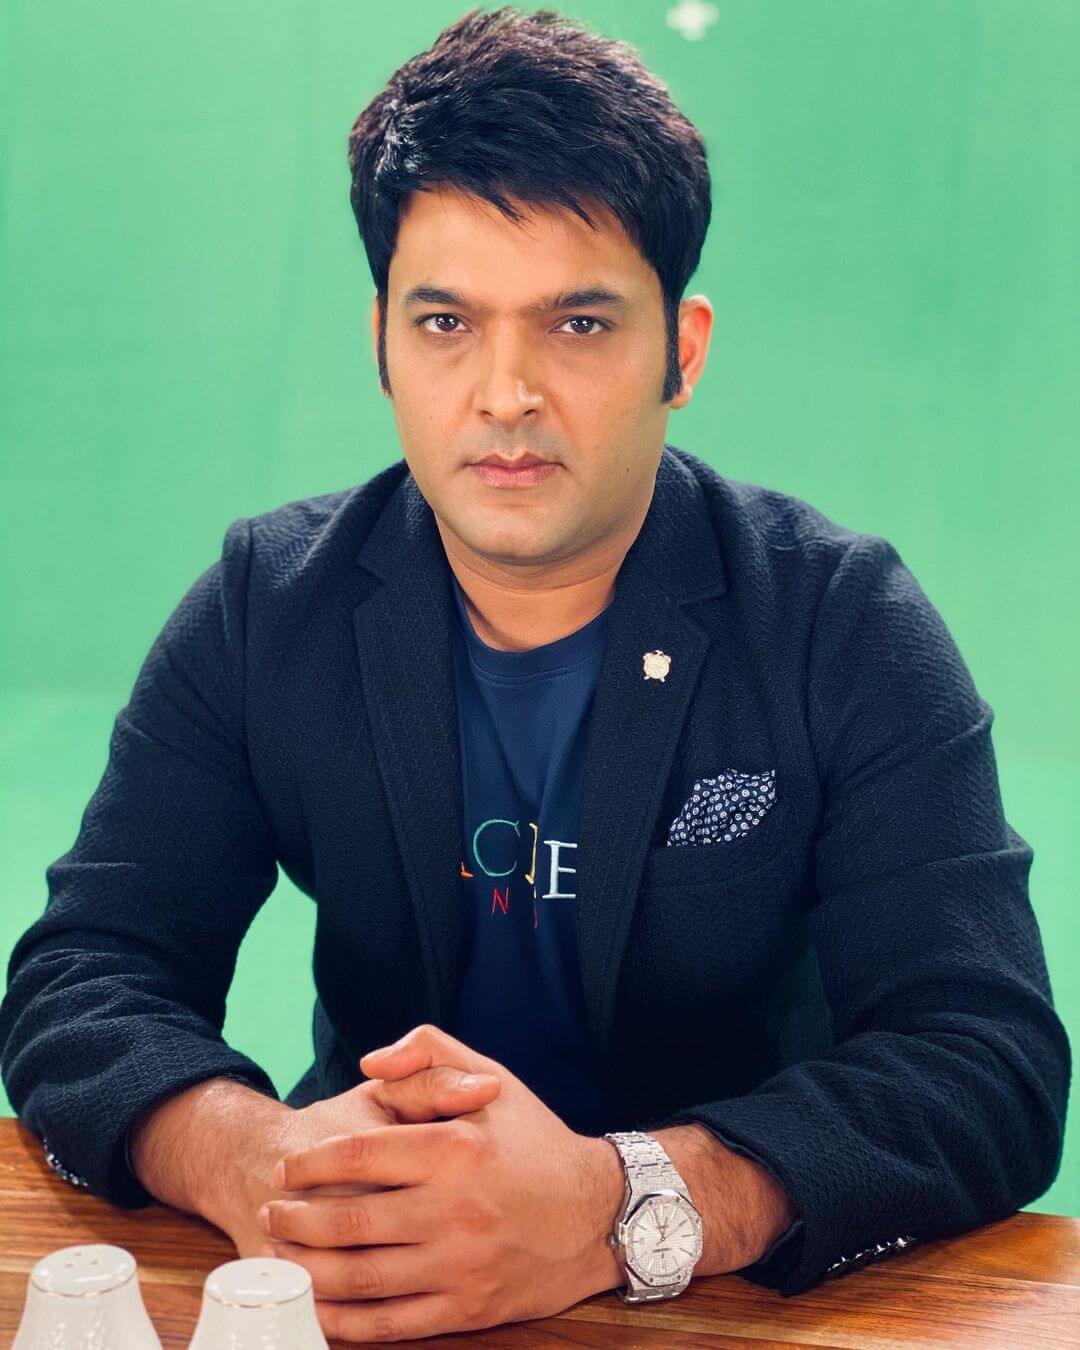 Fees of Actors of The Kapil Sharma Show